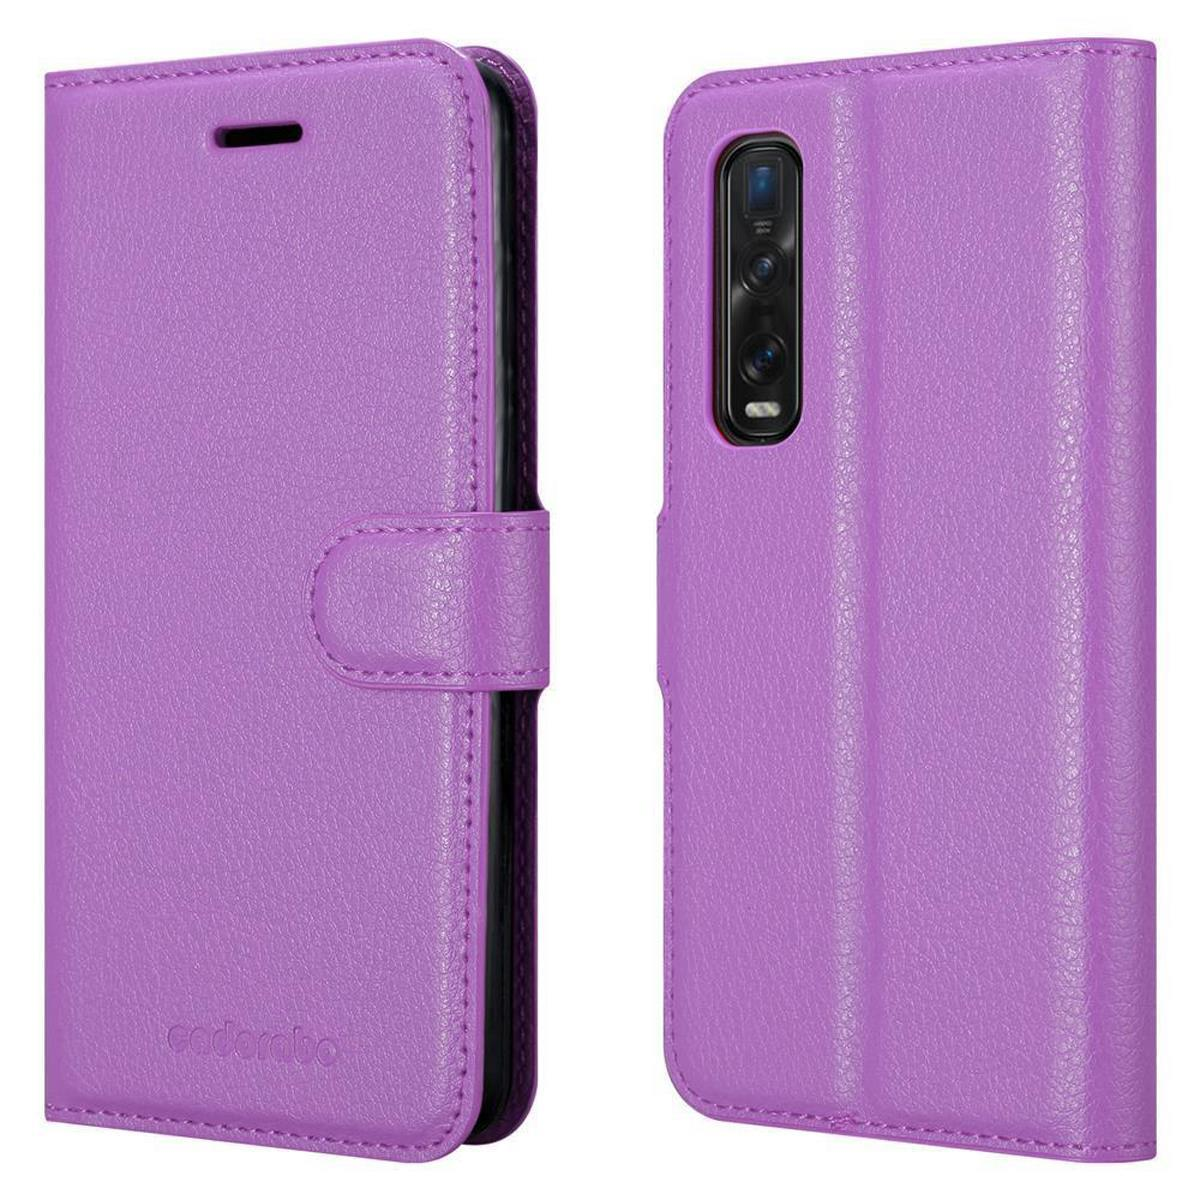 X2 MANGAN Bookcover, CADORABO Book FIND Oppo, PRO, Standfunktion, Hülle VIOLETT